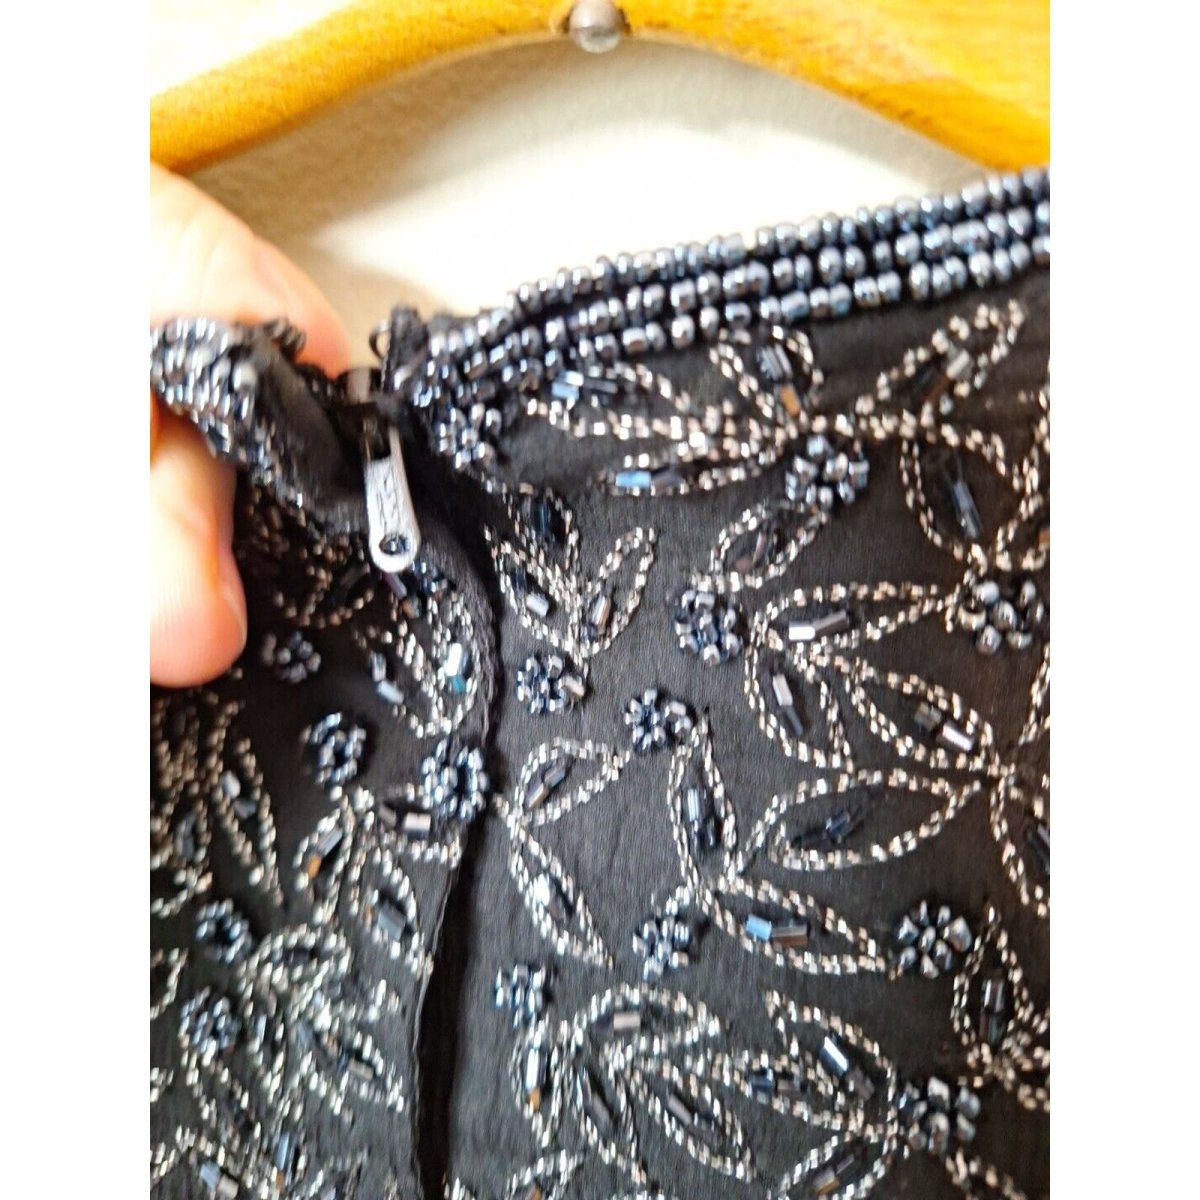 Vintage 90s/Y2K Beaded Cropped Silk Blouse Women Size Medium - themallvintage The Mall Vintage